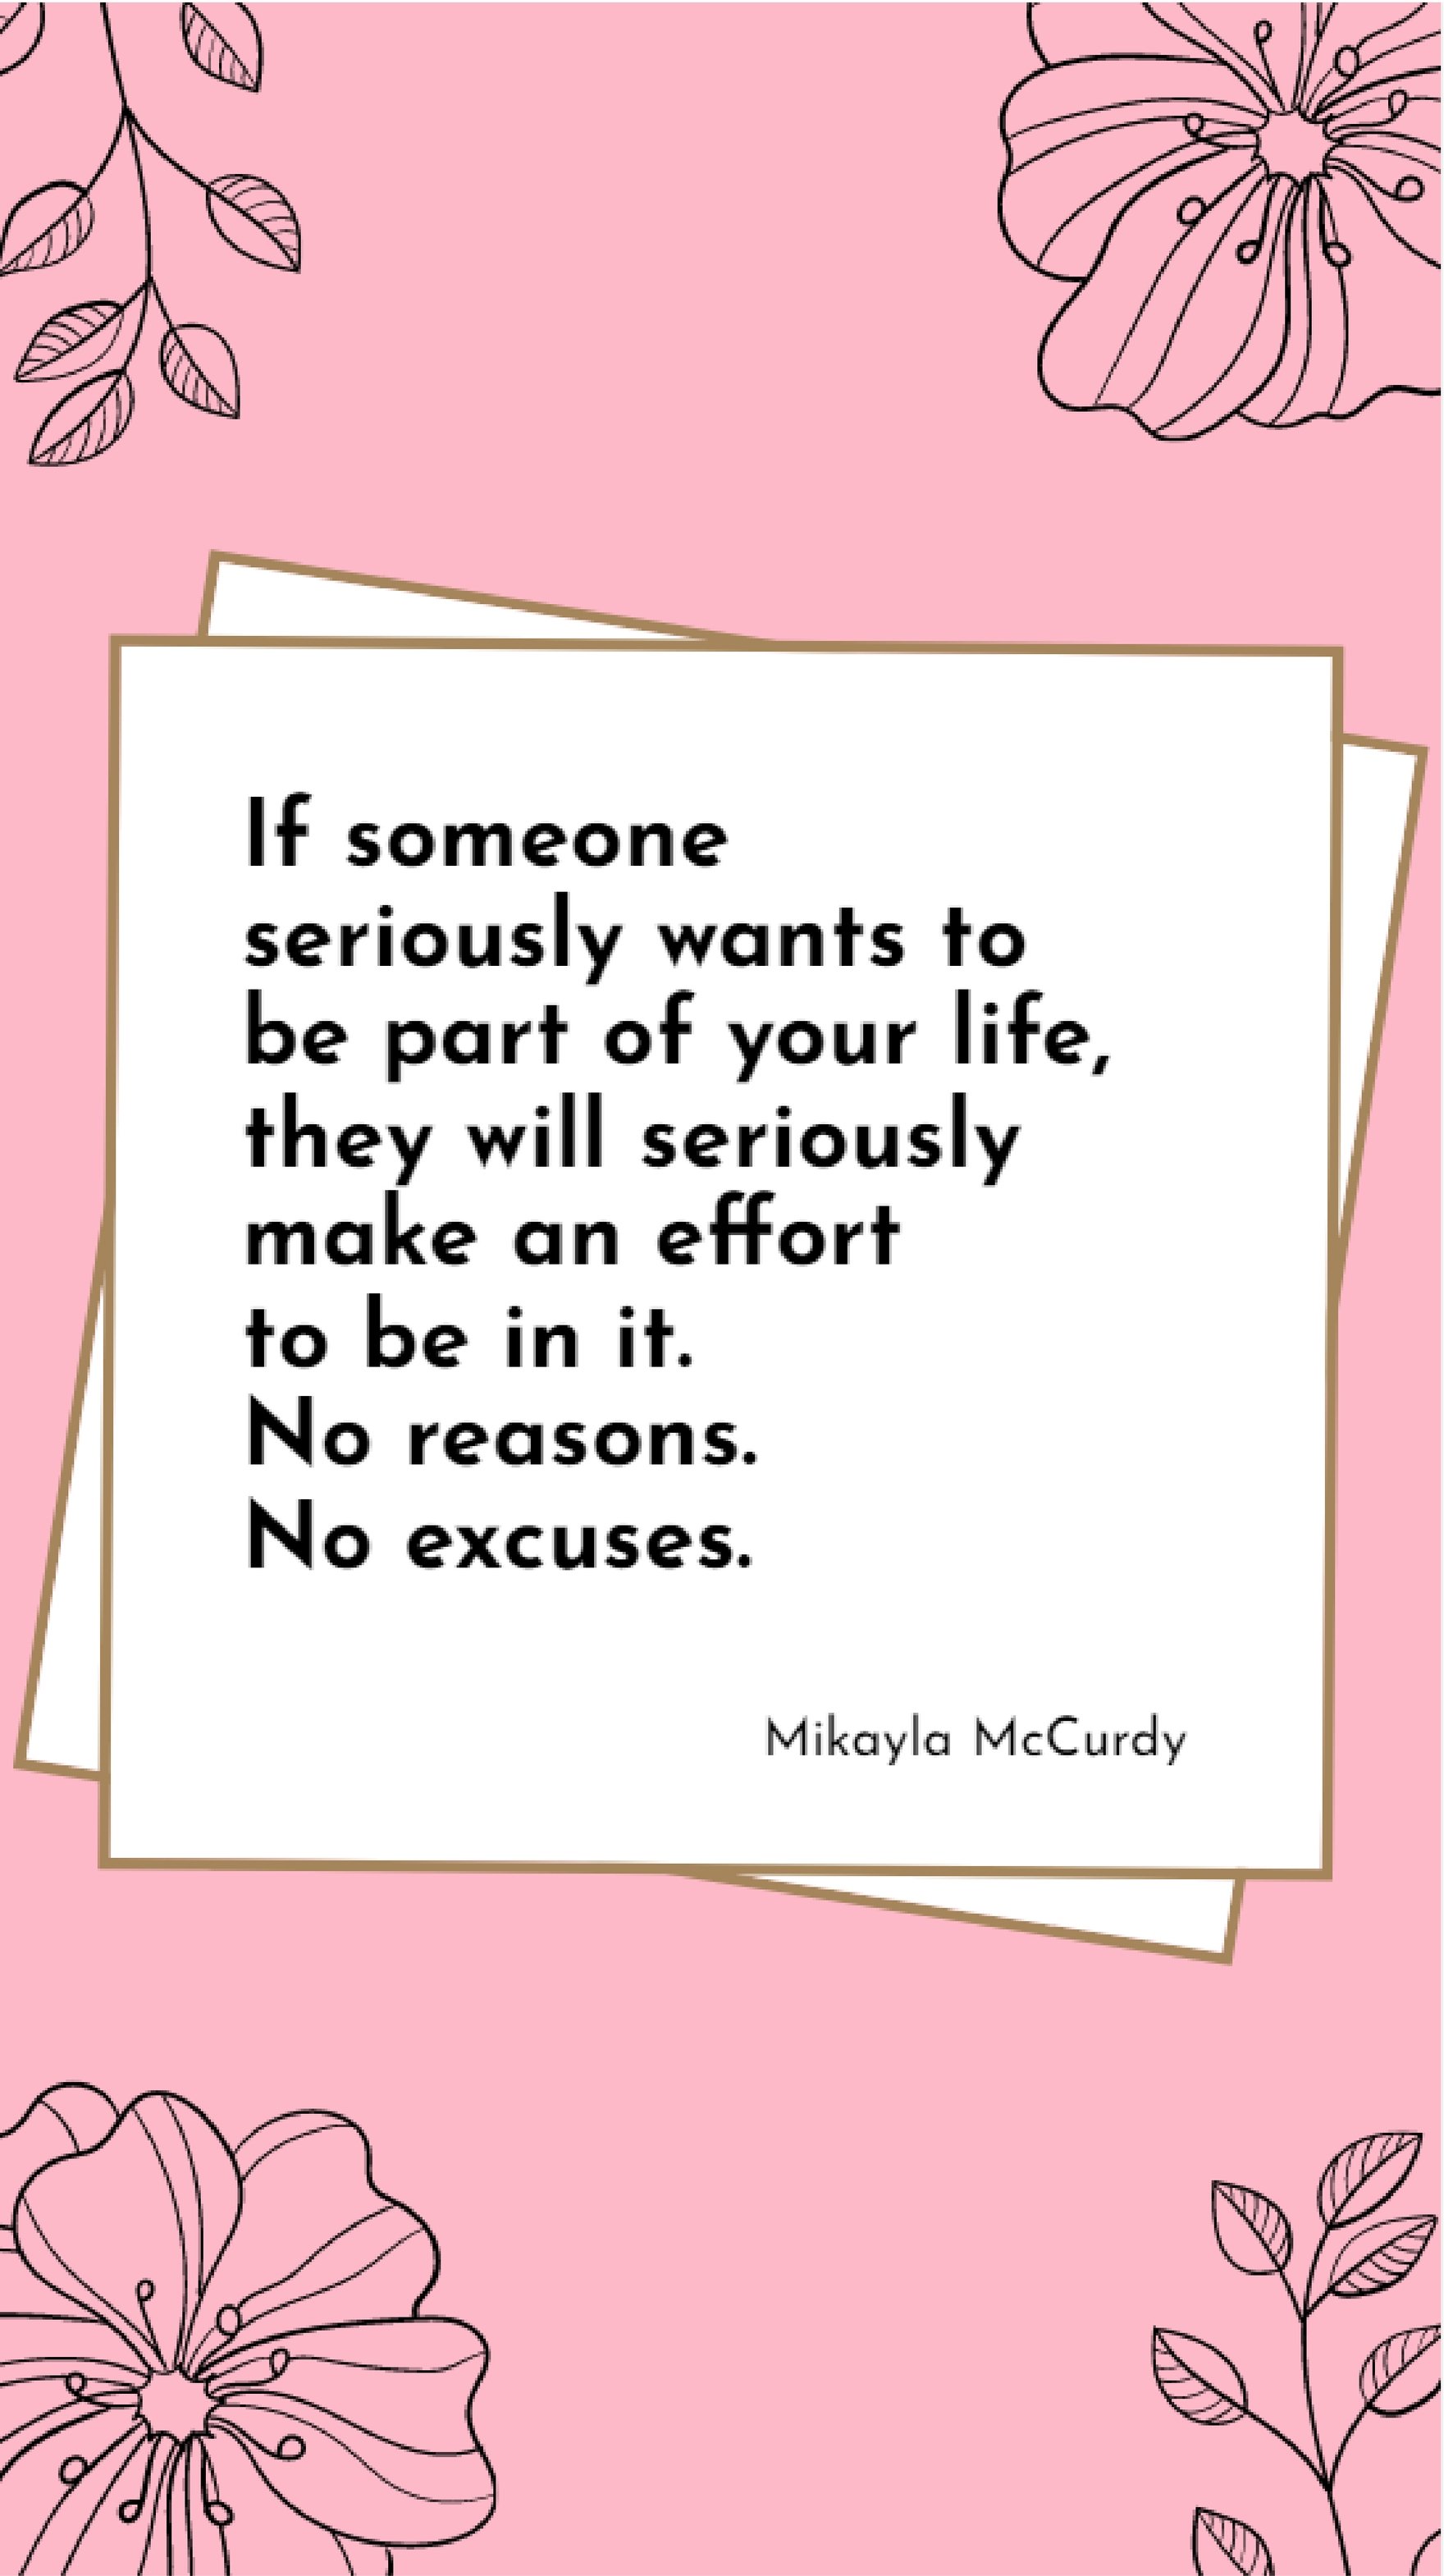 Mikayla McCurdy - If someone seriously wants to be part of your life, they will seriously make an effort to be in it. No reasons. No excuses. 